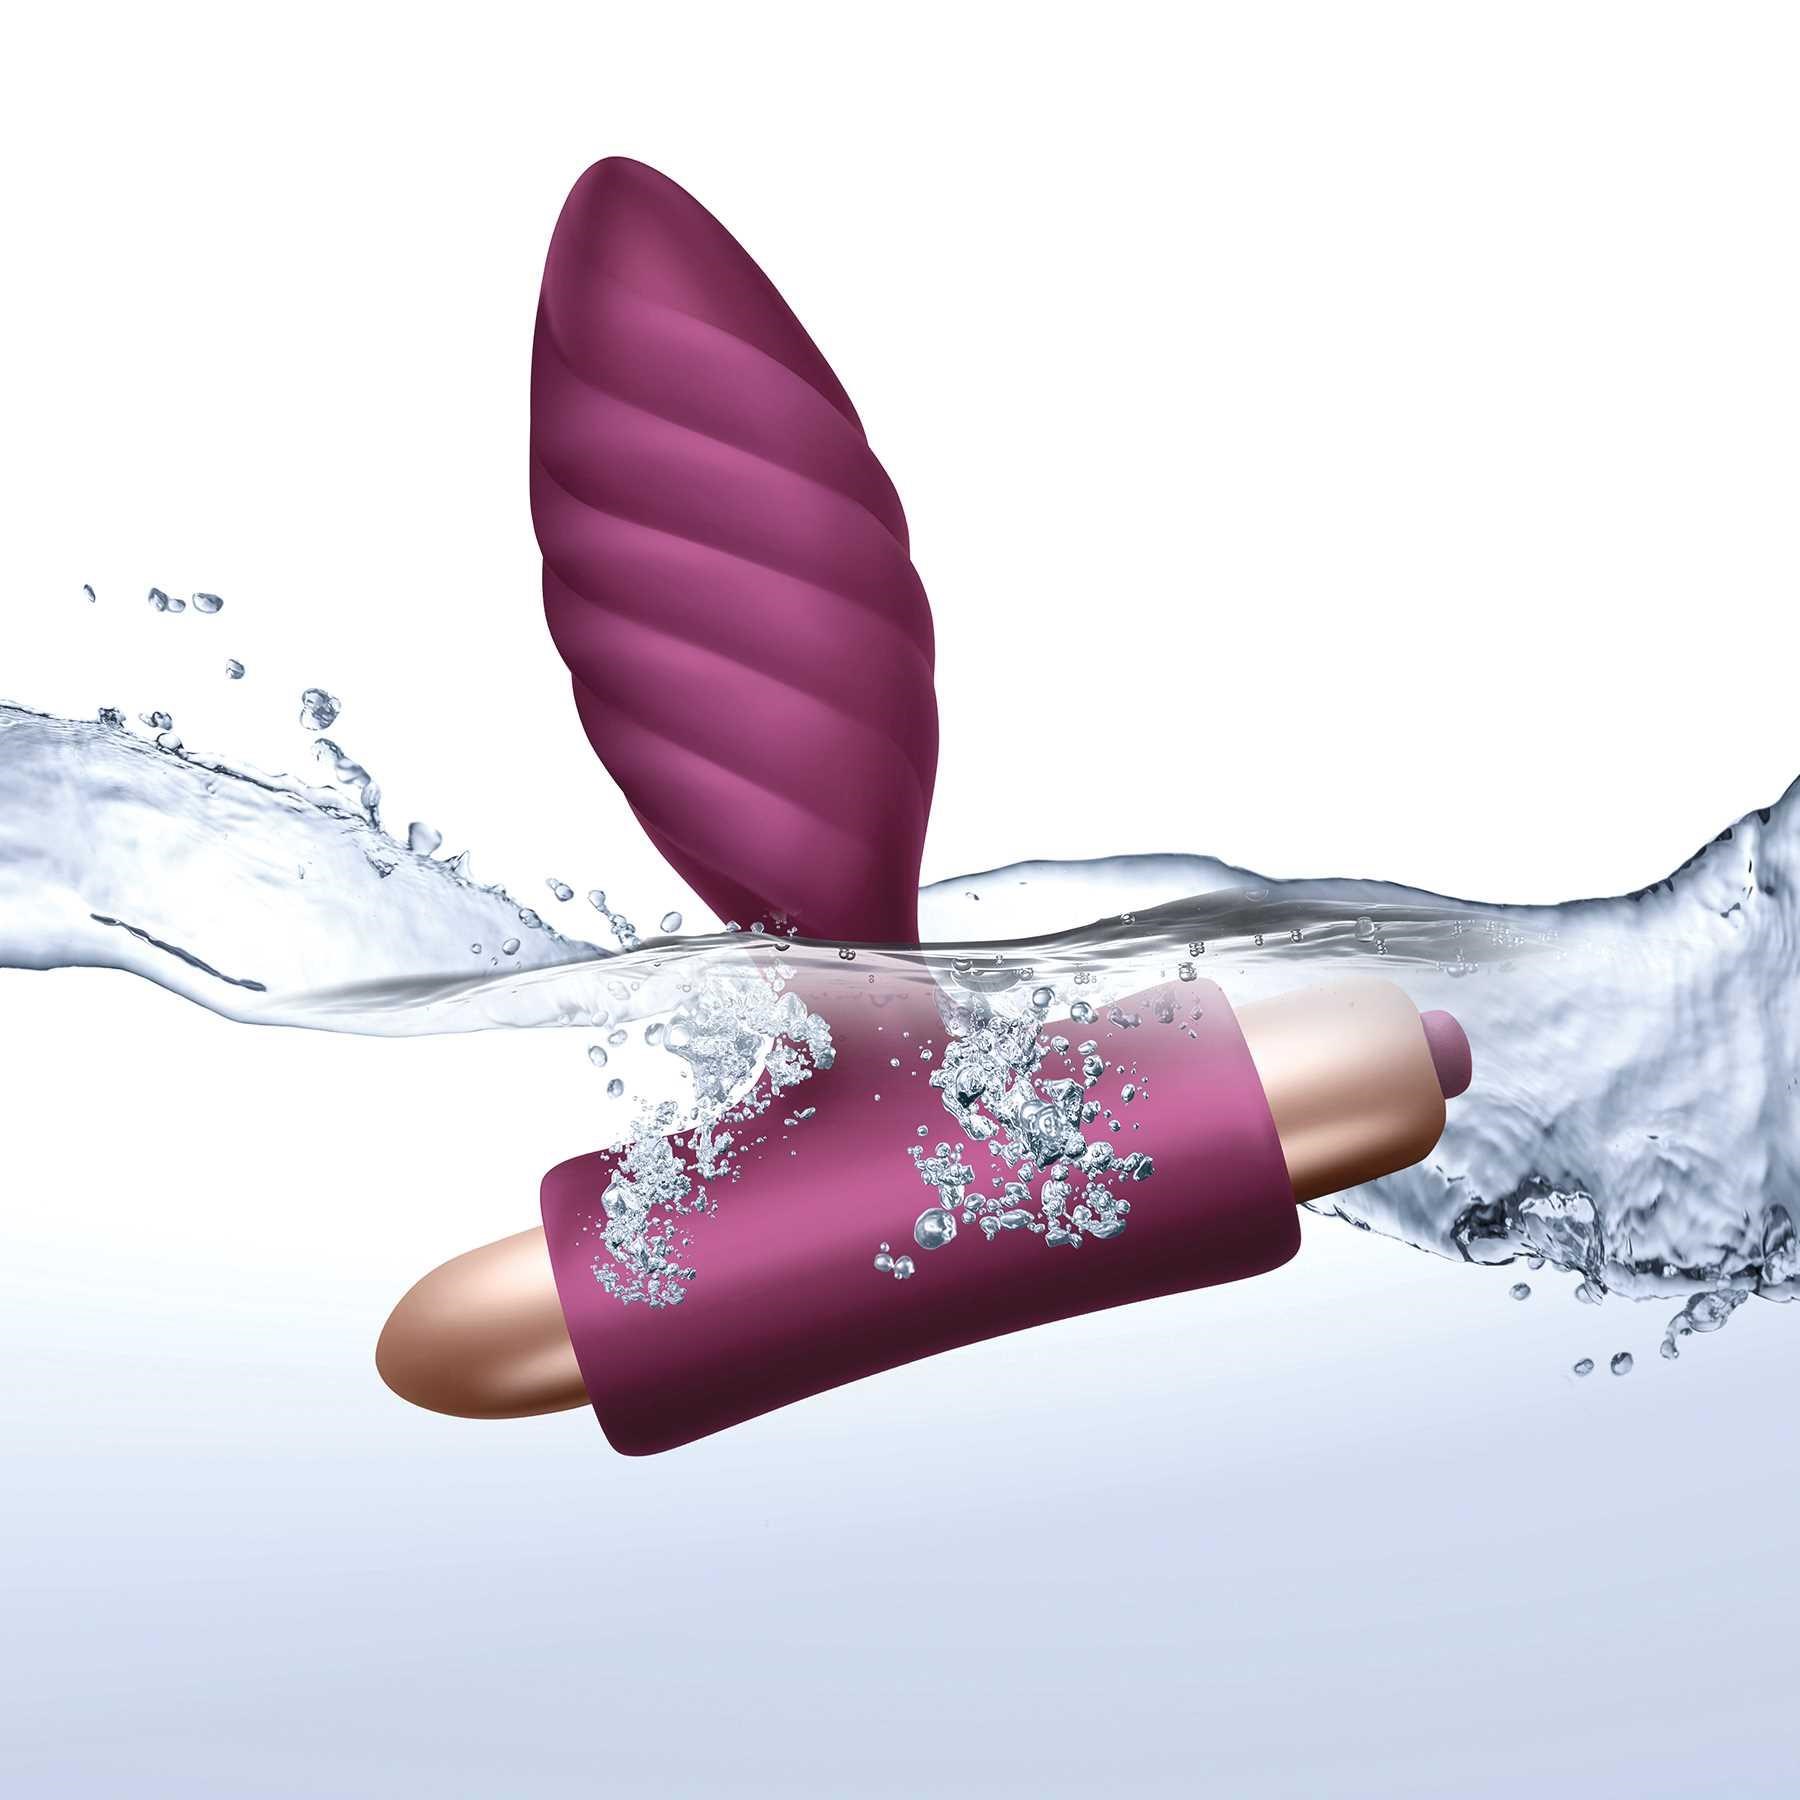 Climaximum Oryx anal vibrator in water